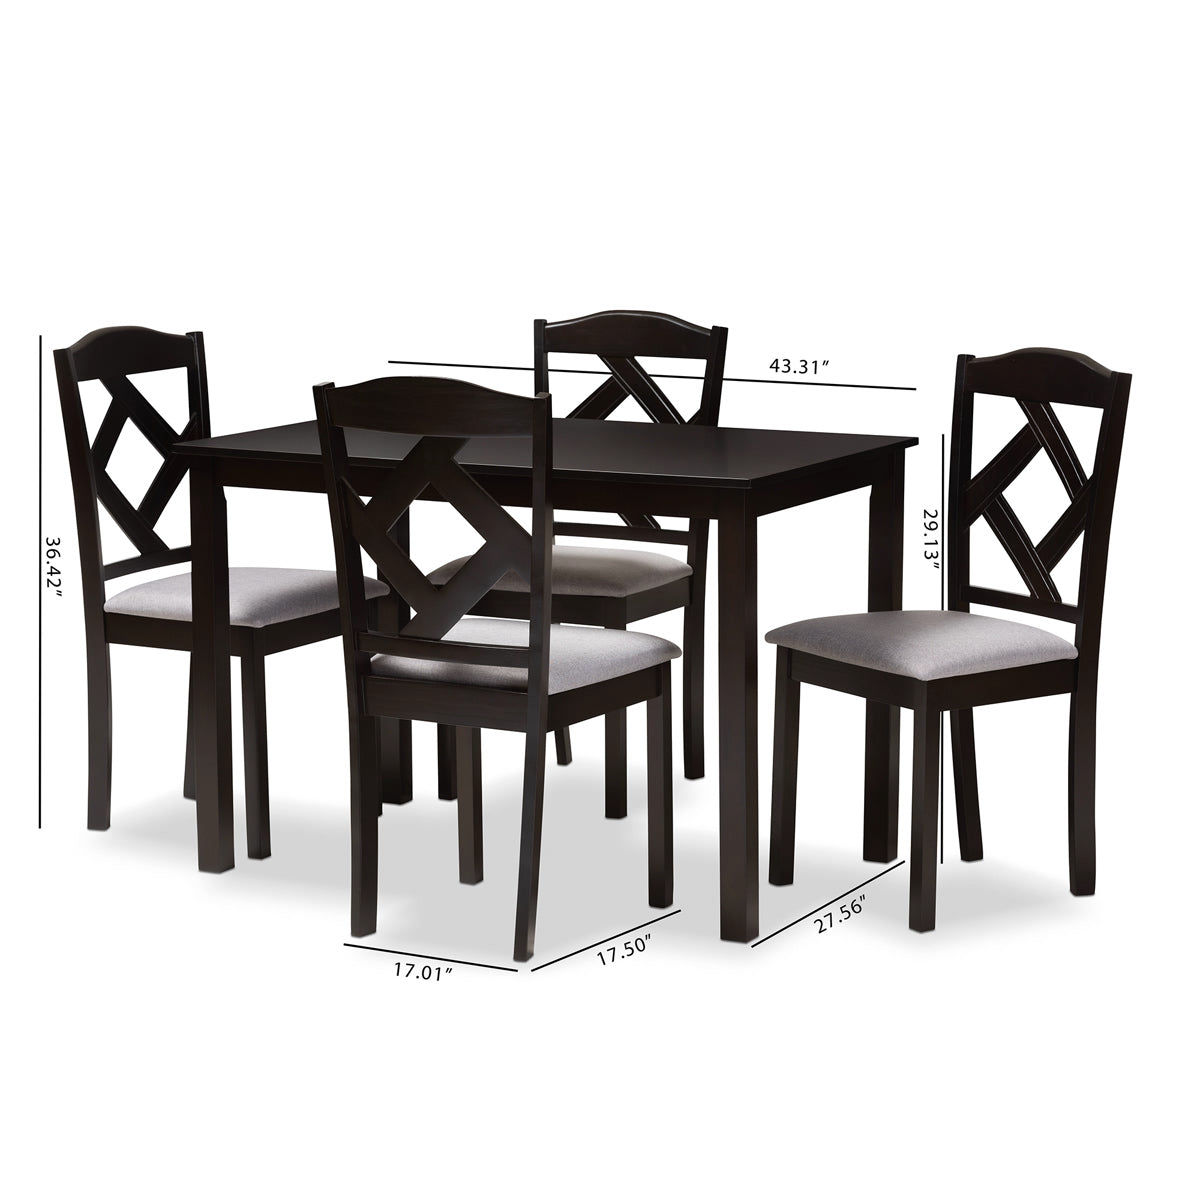 Baxton Studio Ruth Modern and Contemporary Espresso Brown Finished and Grey Fabric Upholstered 5-Piece Dining Set Baxton Studio-0-Minimal And Modern - 4